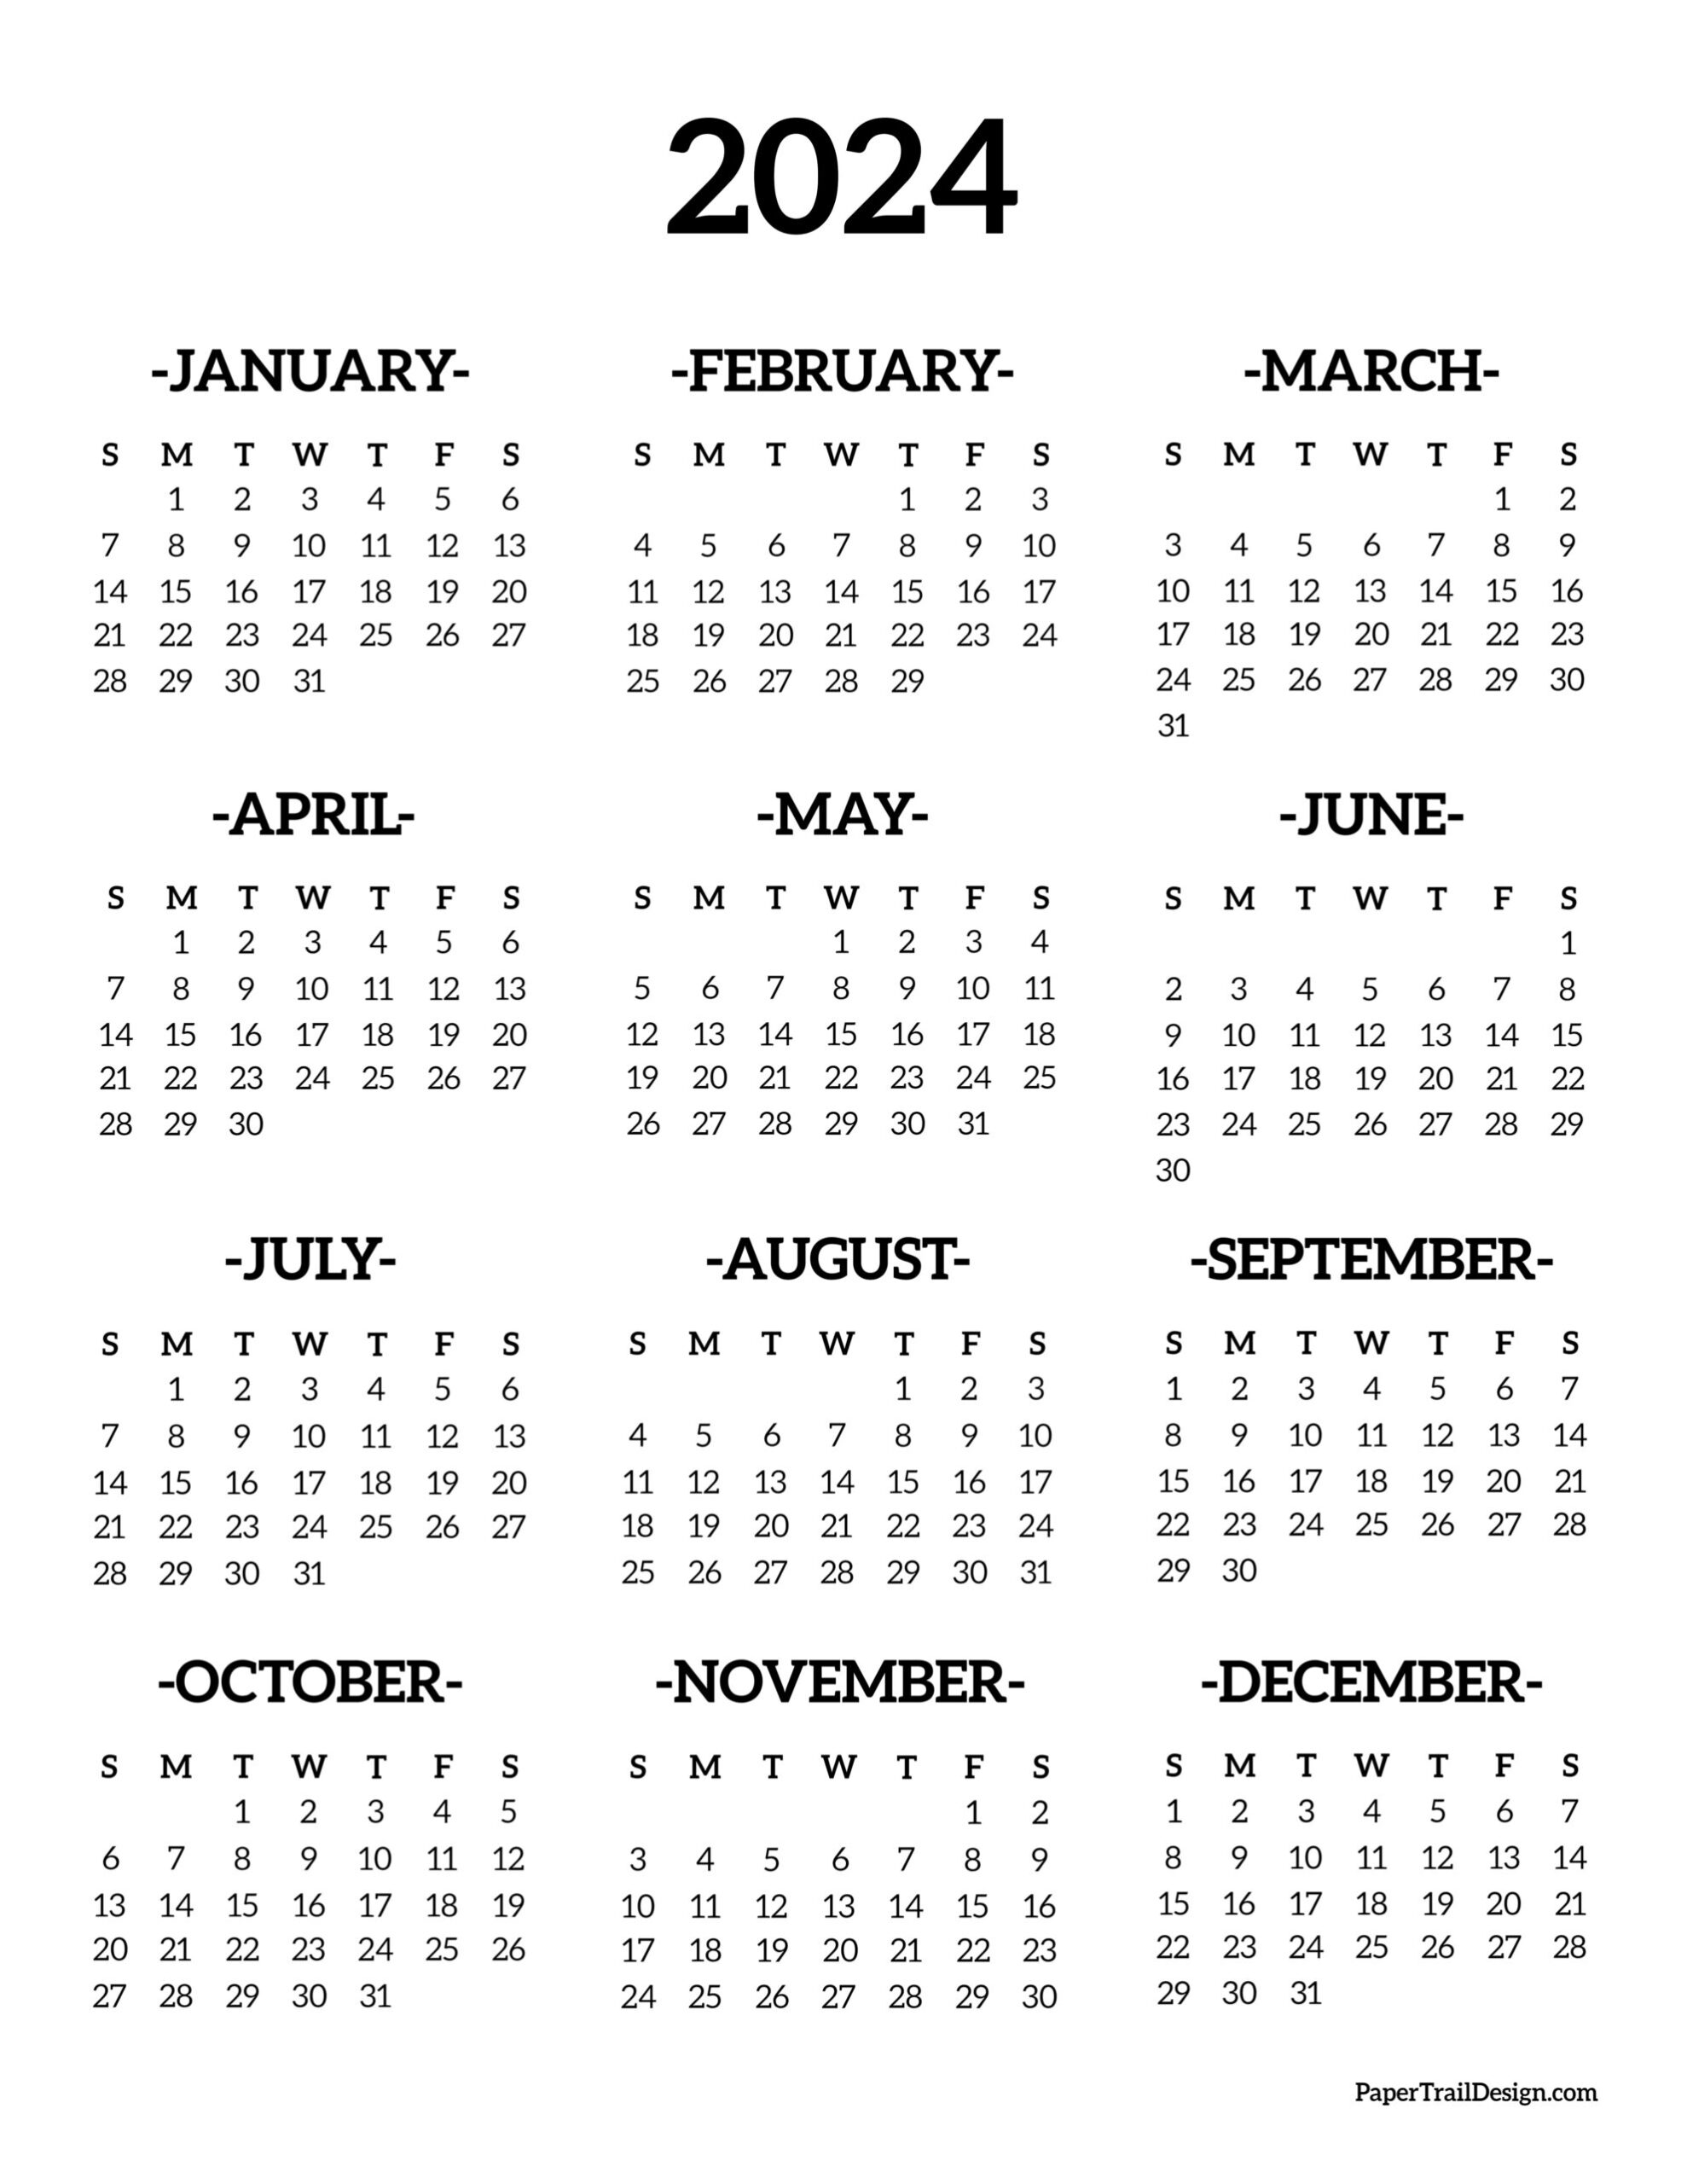 Calendar 2024 Printable One Page - Paper Trail Design for 2024 Yearly Free Printable Calendar